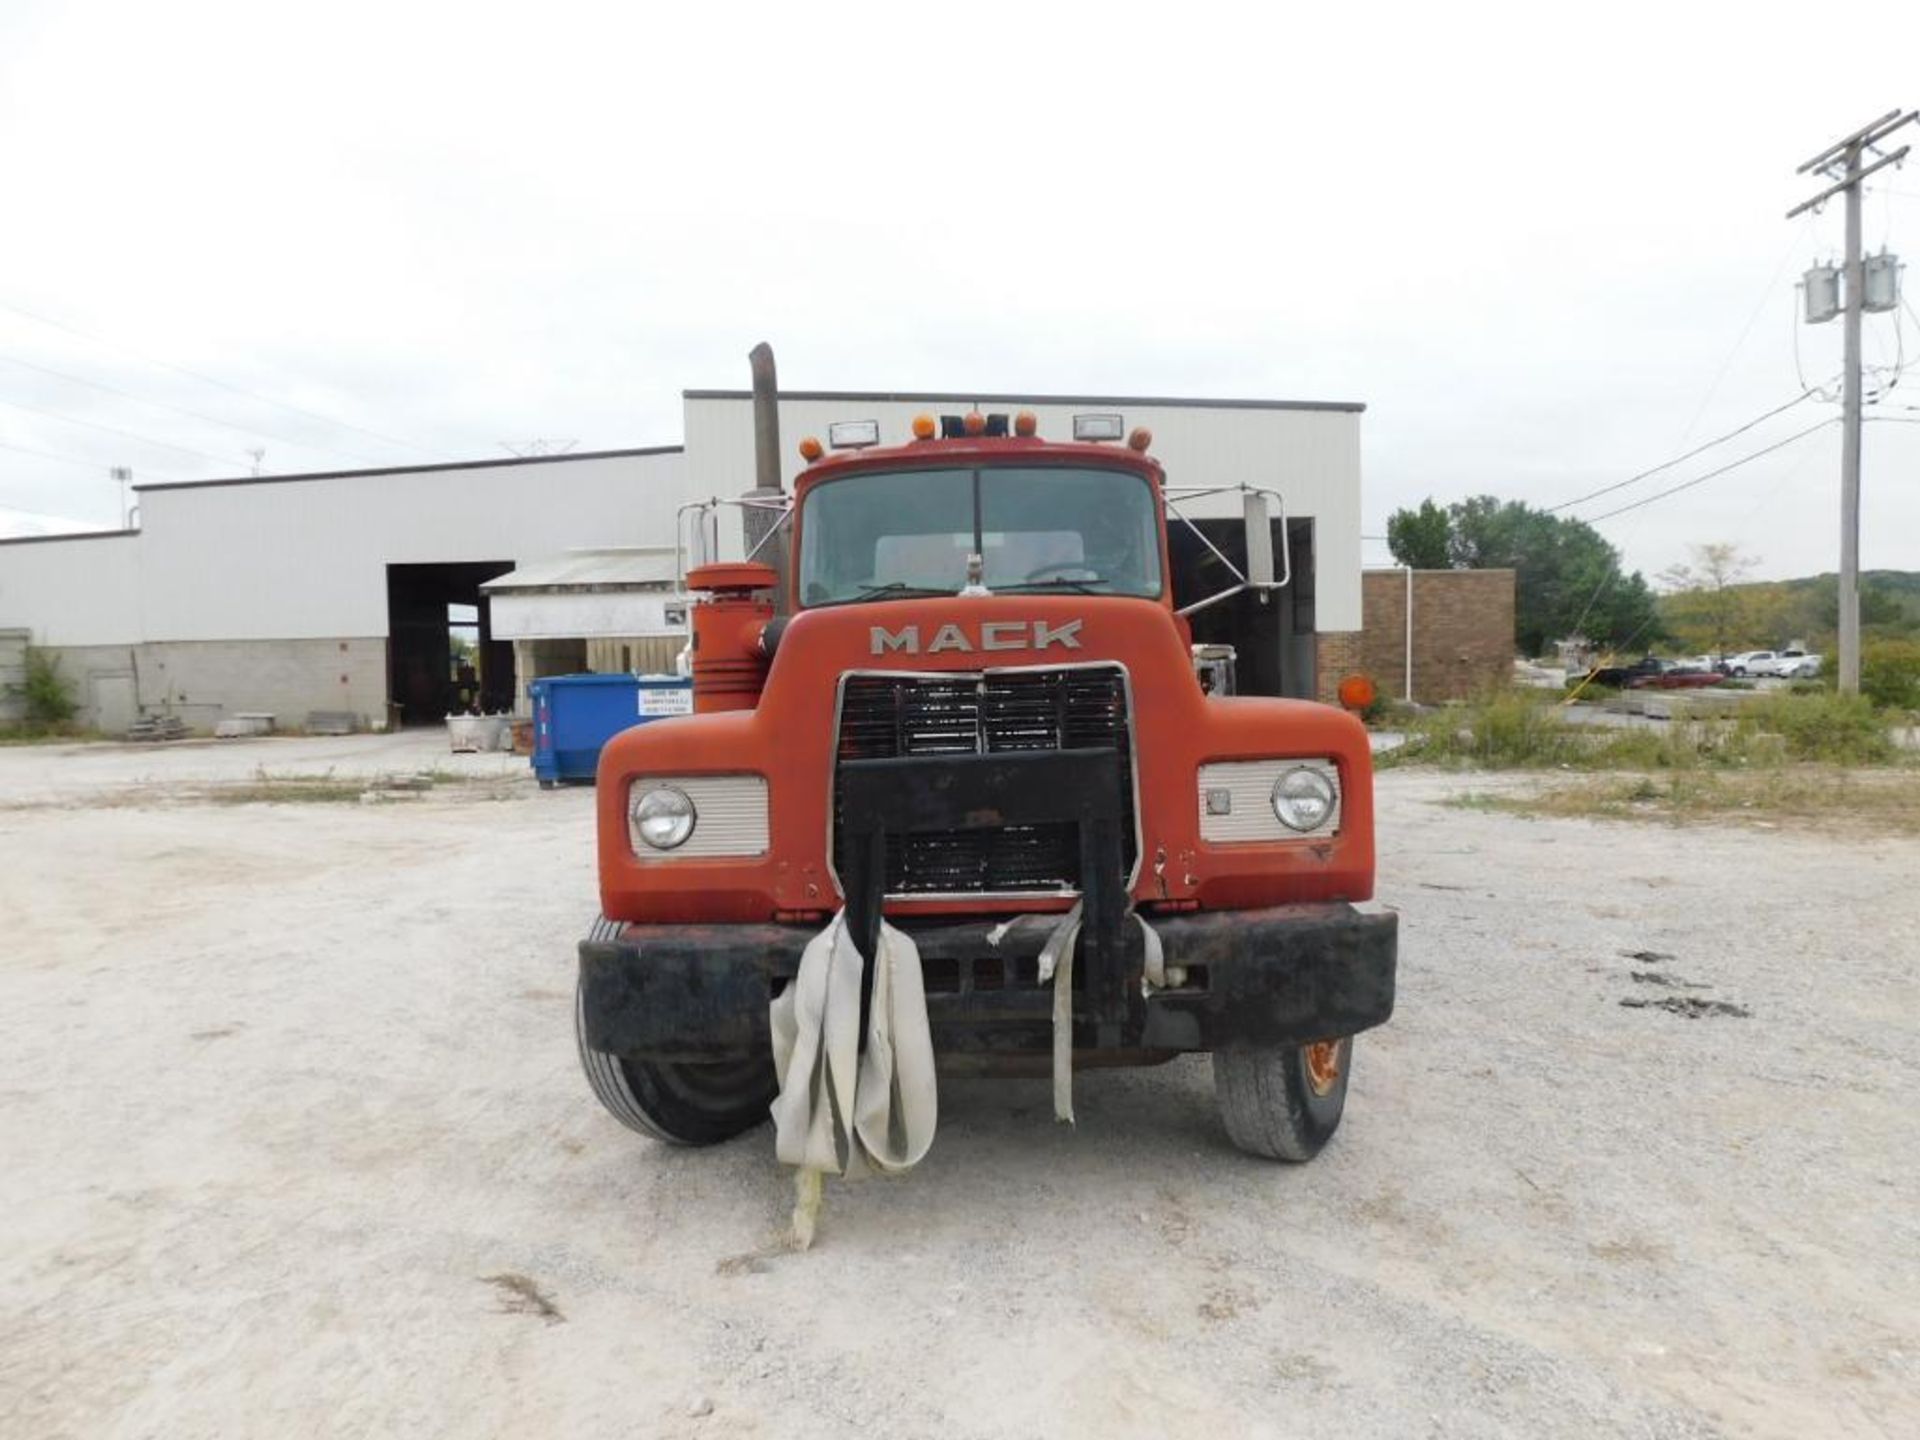 LOT: 1989 Mack T.A. Truck Tractor Model R688ST, VIN 1M2N187Y4KW029817, 27,017 hours indicated w/T.A. - Image 3 of 9